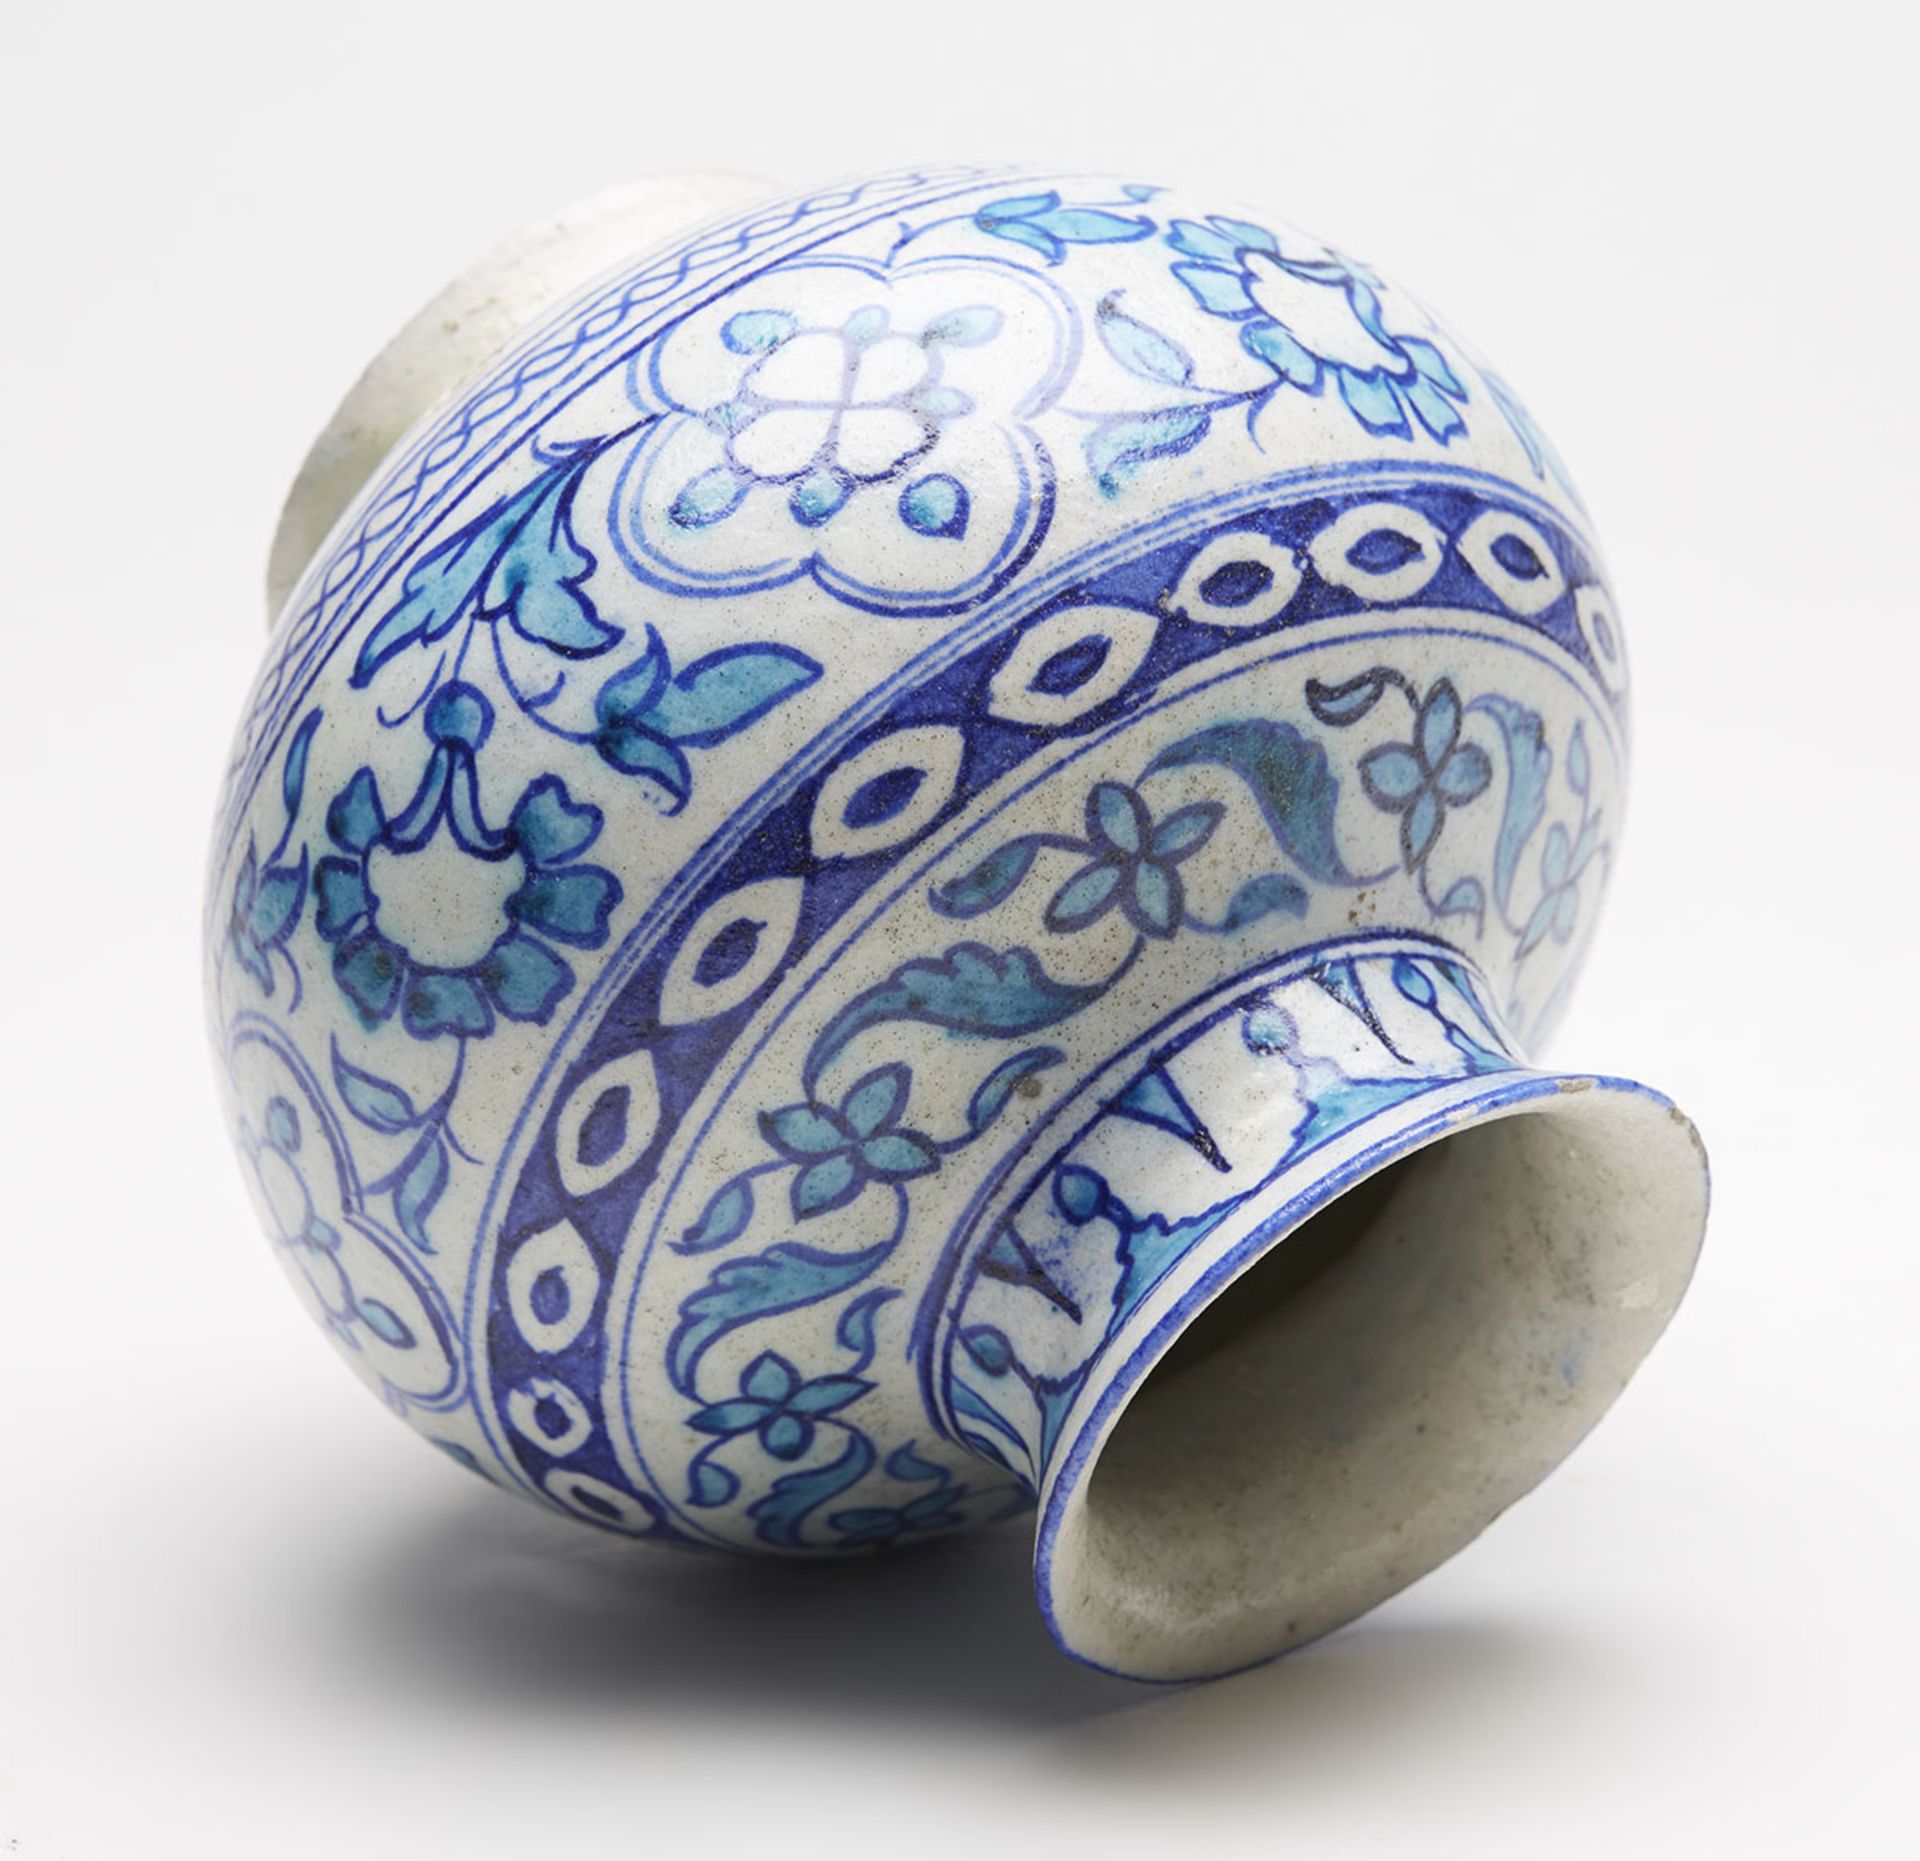 ANTIQUE MIDDLE EASTERN/INDIAN BLUE & WHITE VASE 19TH C.   DIMENSIONS   Height 13,5cm, Diameter 14, - Image 9 of 9